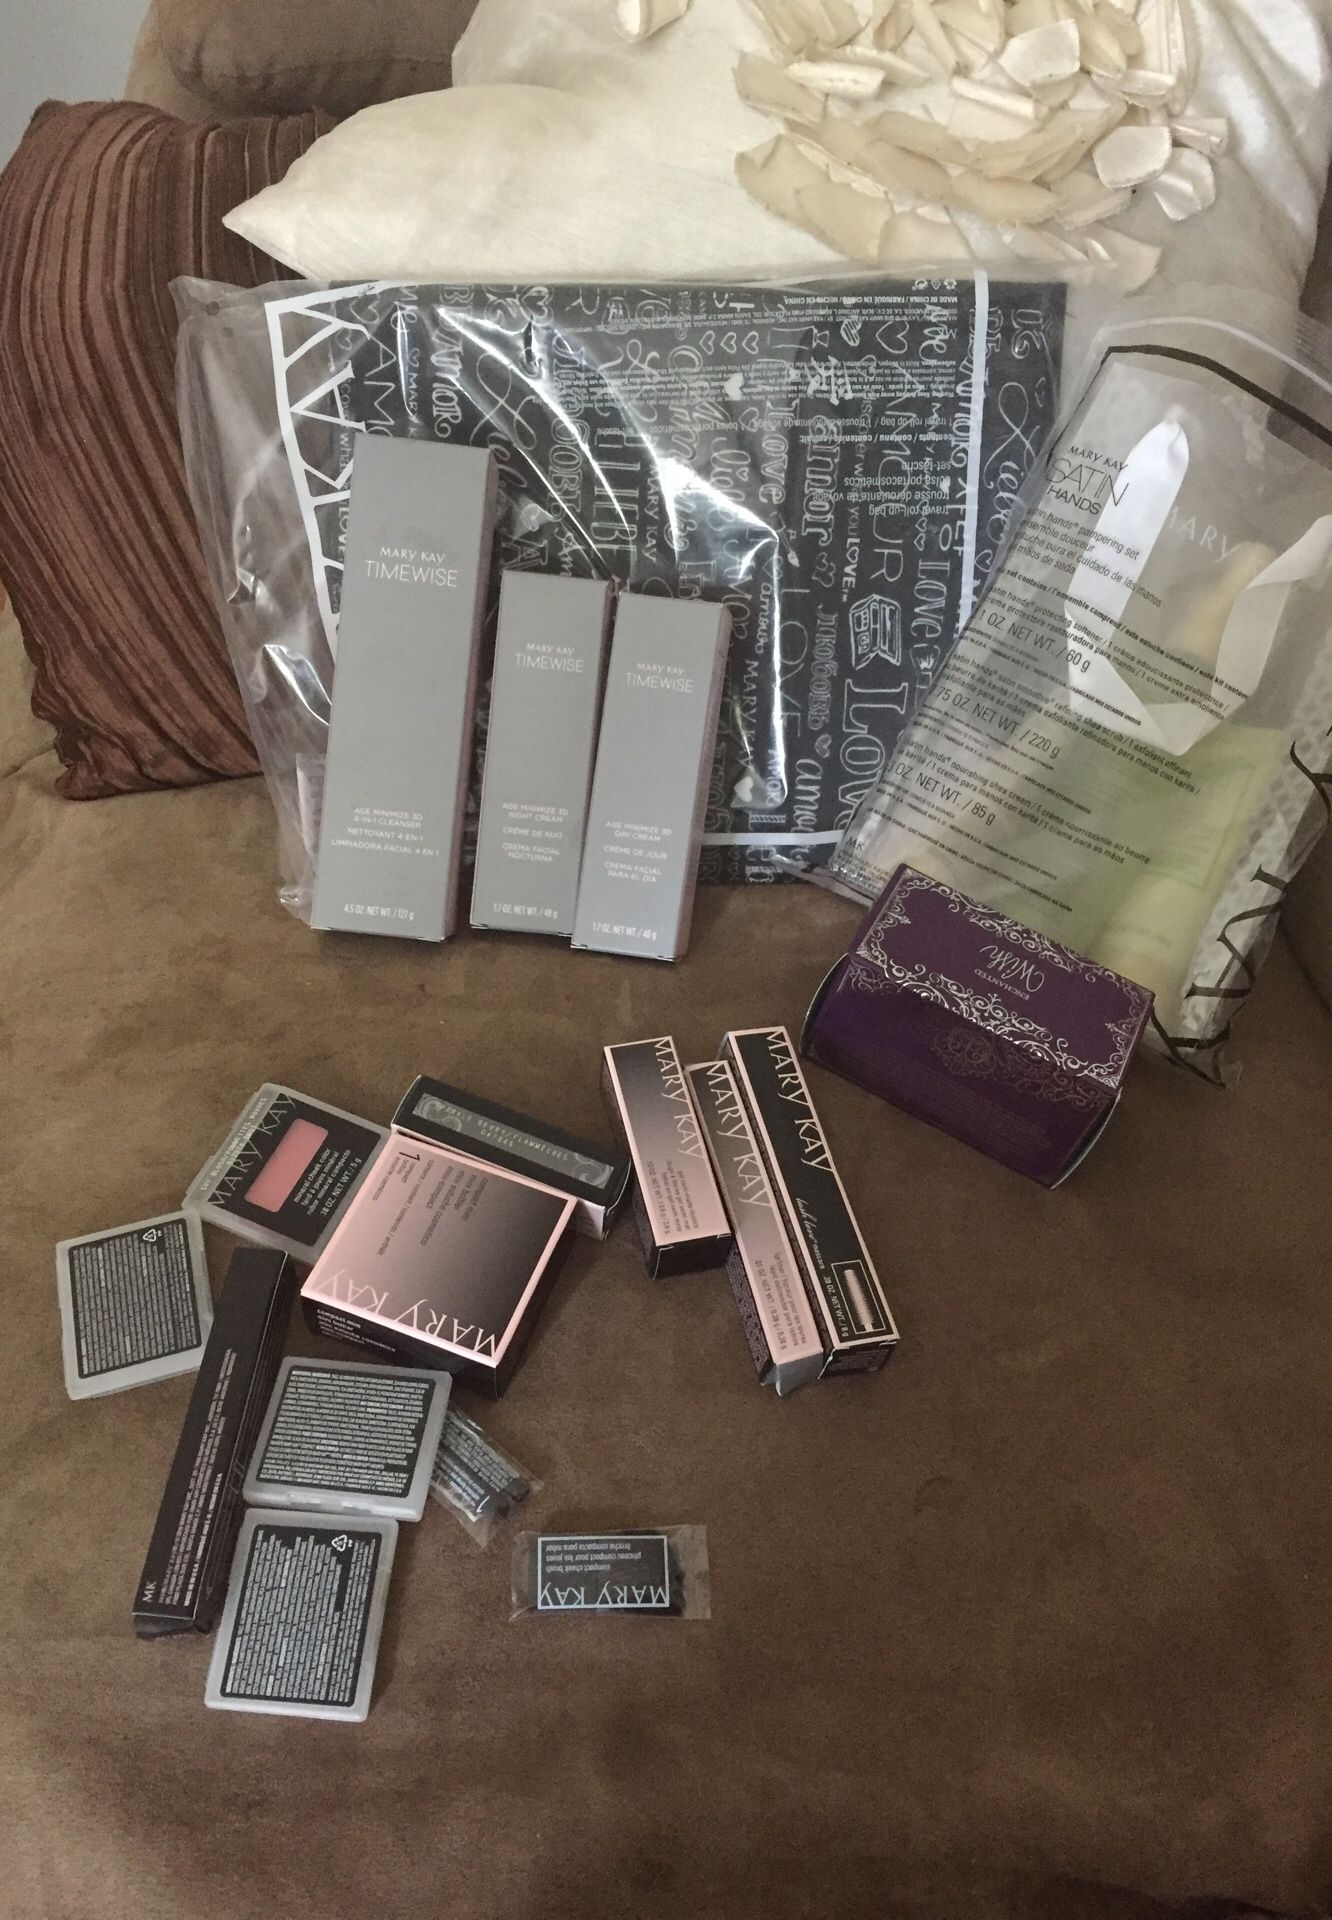 A Facial a perfume enchanted wish silk hands set of makeup and pouch 200$